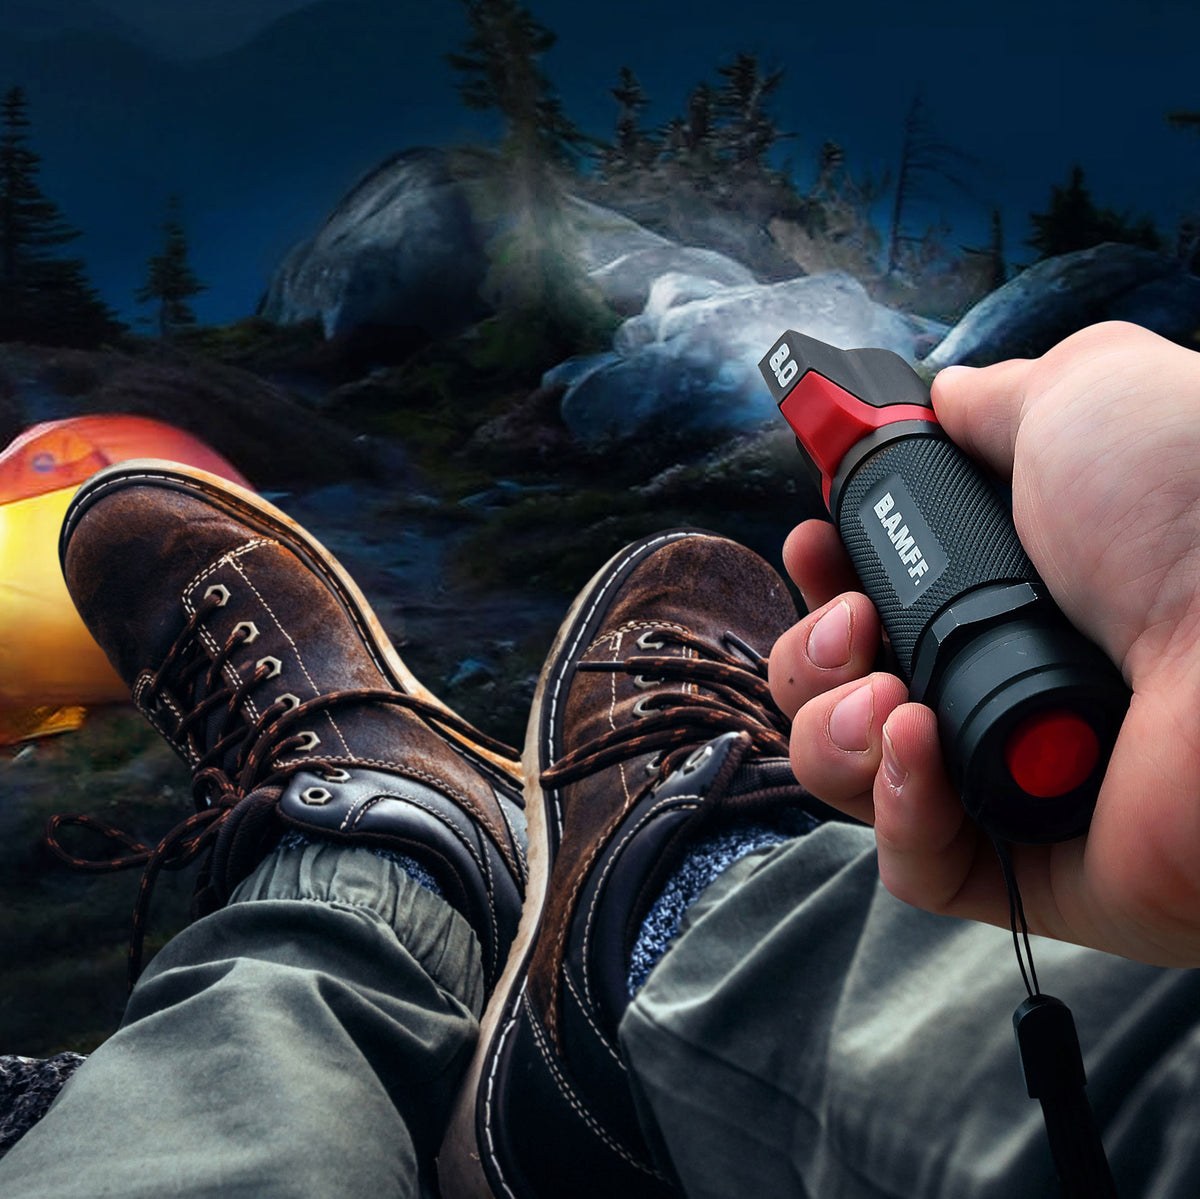 5 best flashlights for camping and the outdoors - STKR Concepts